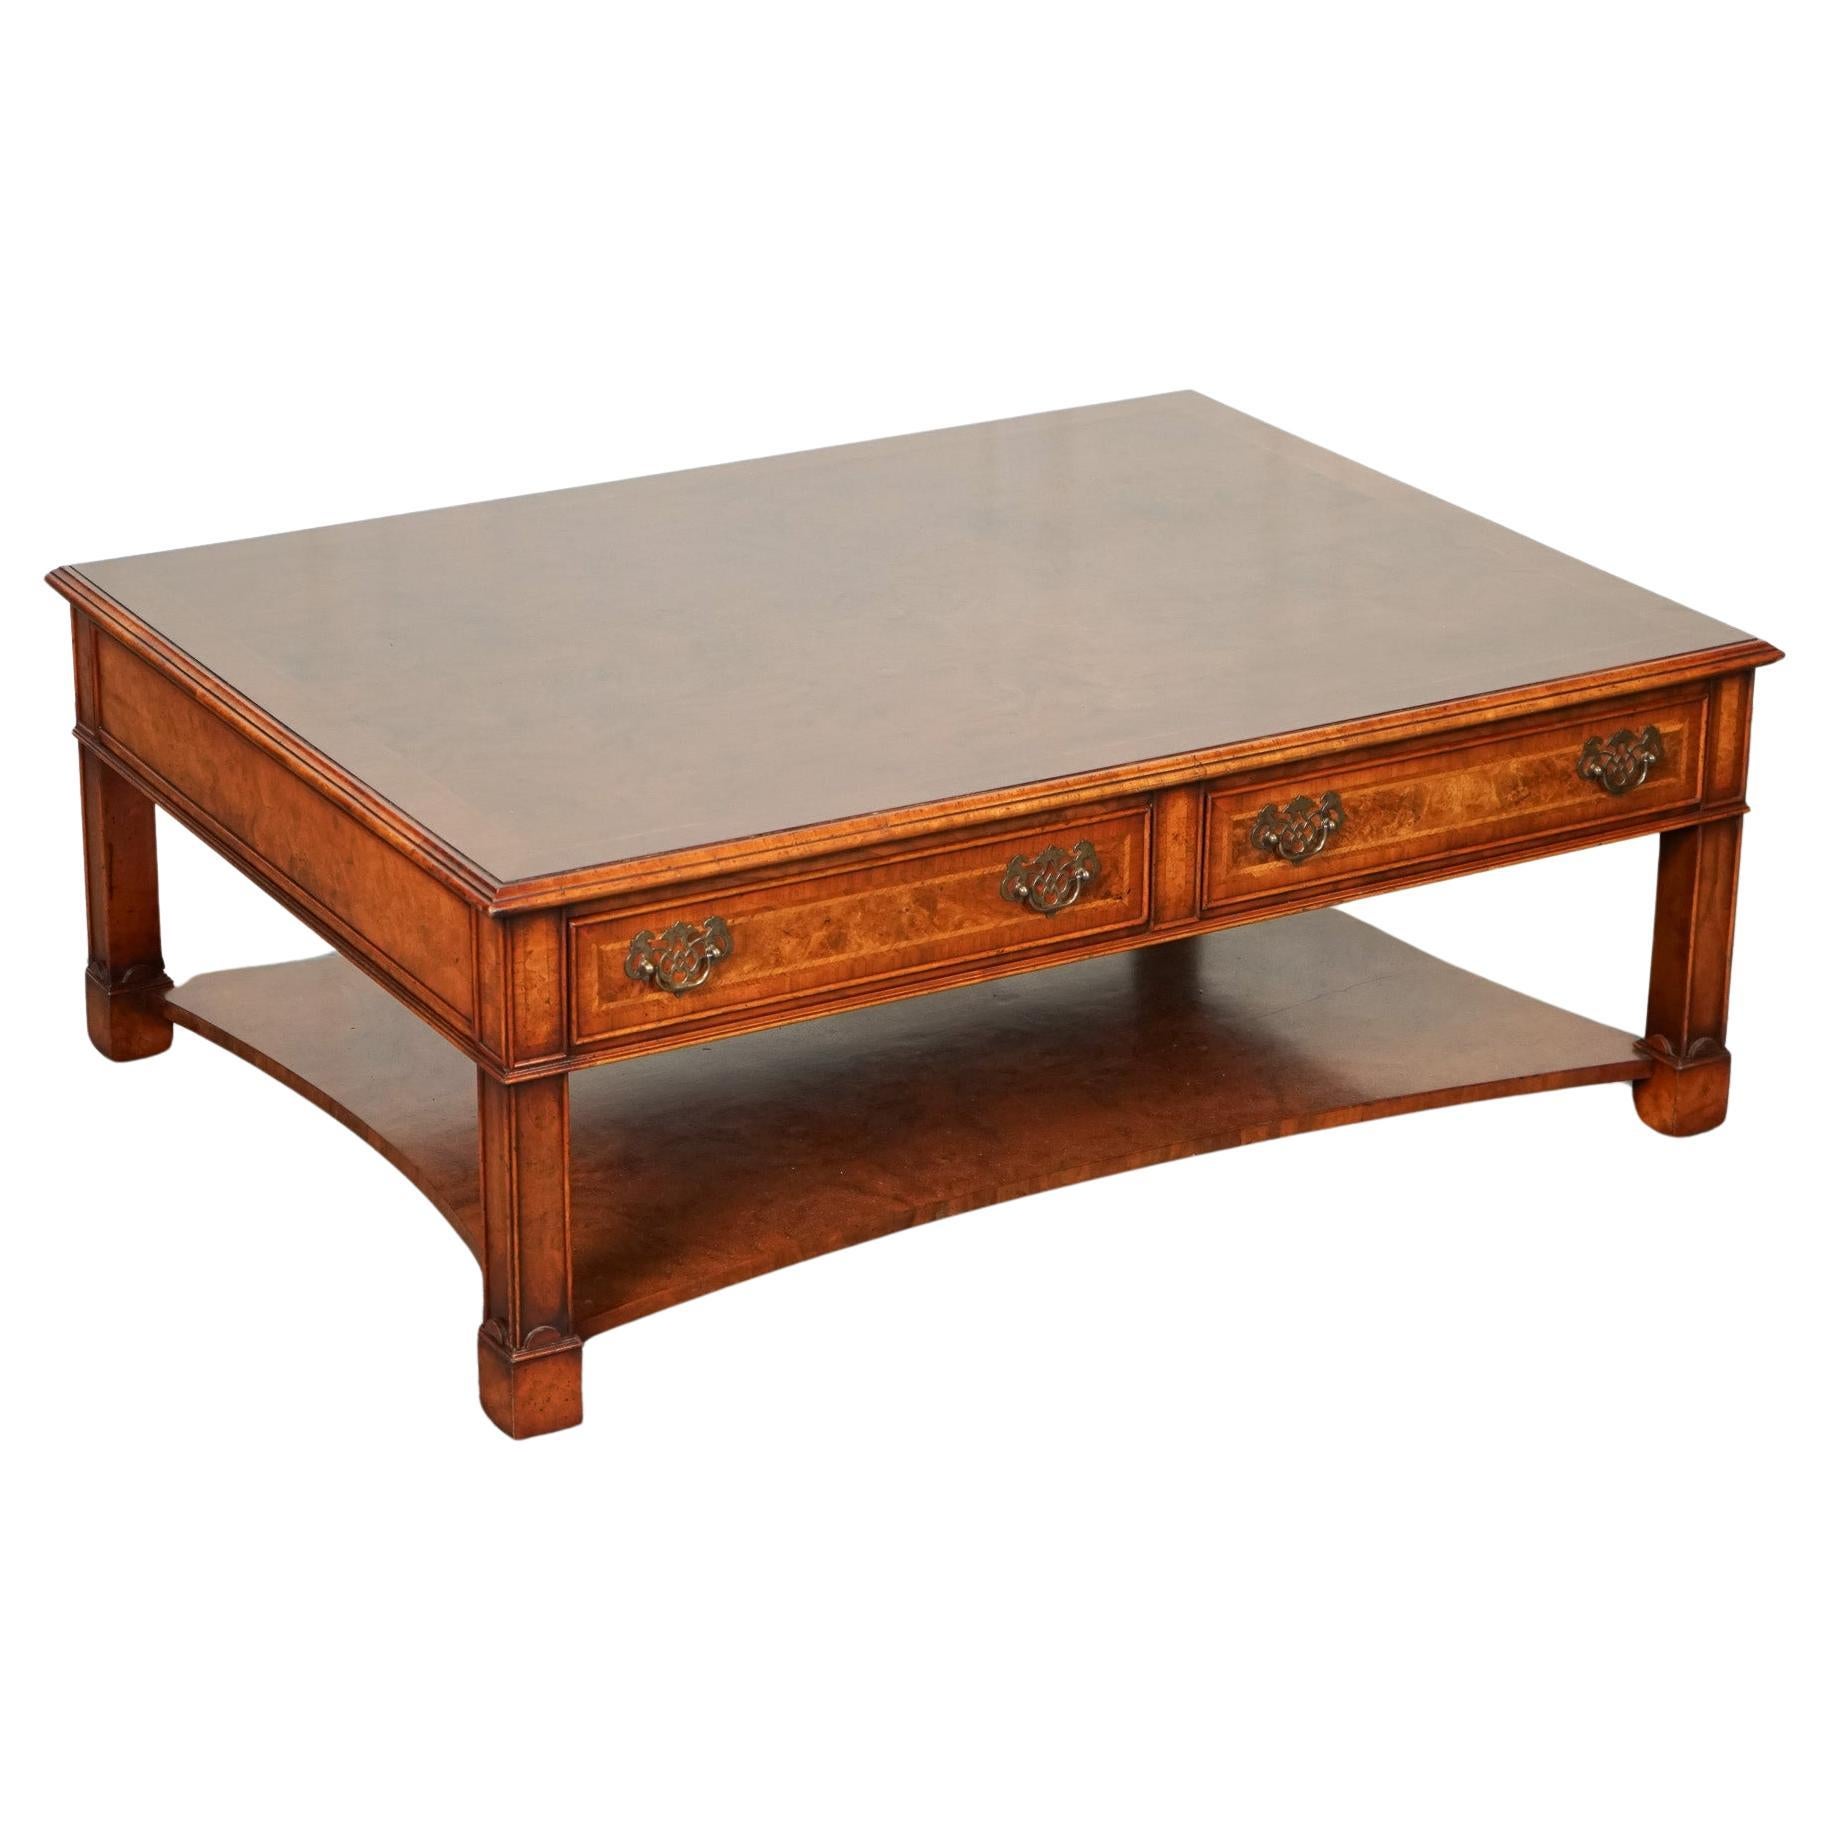 LARGE BRIGHTS OF NETTLEBED BURR WALNUT COFFEE TABLE WITH DOUBLE SIDED DRAWERS j1 For Sale